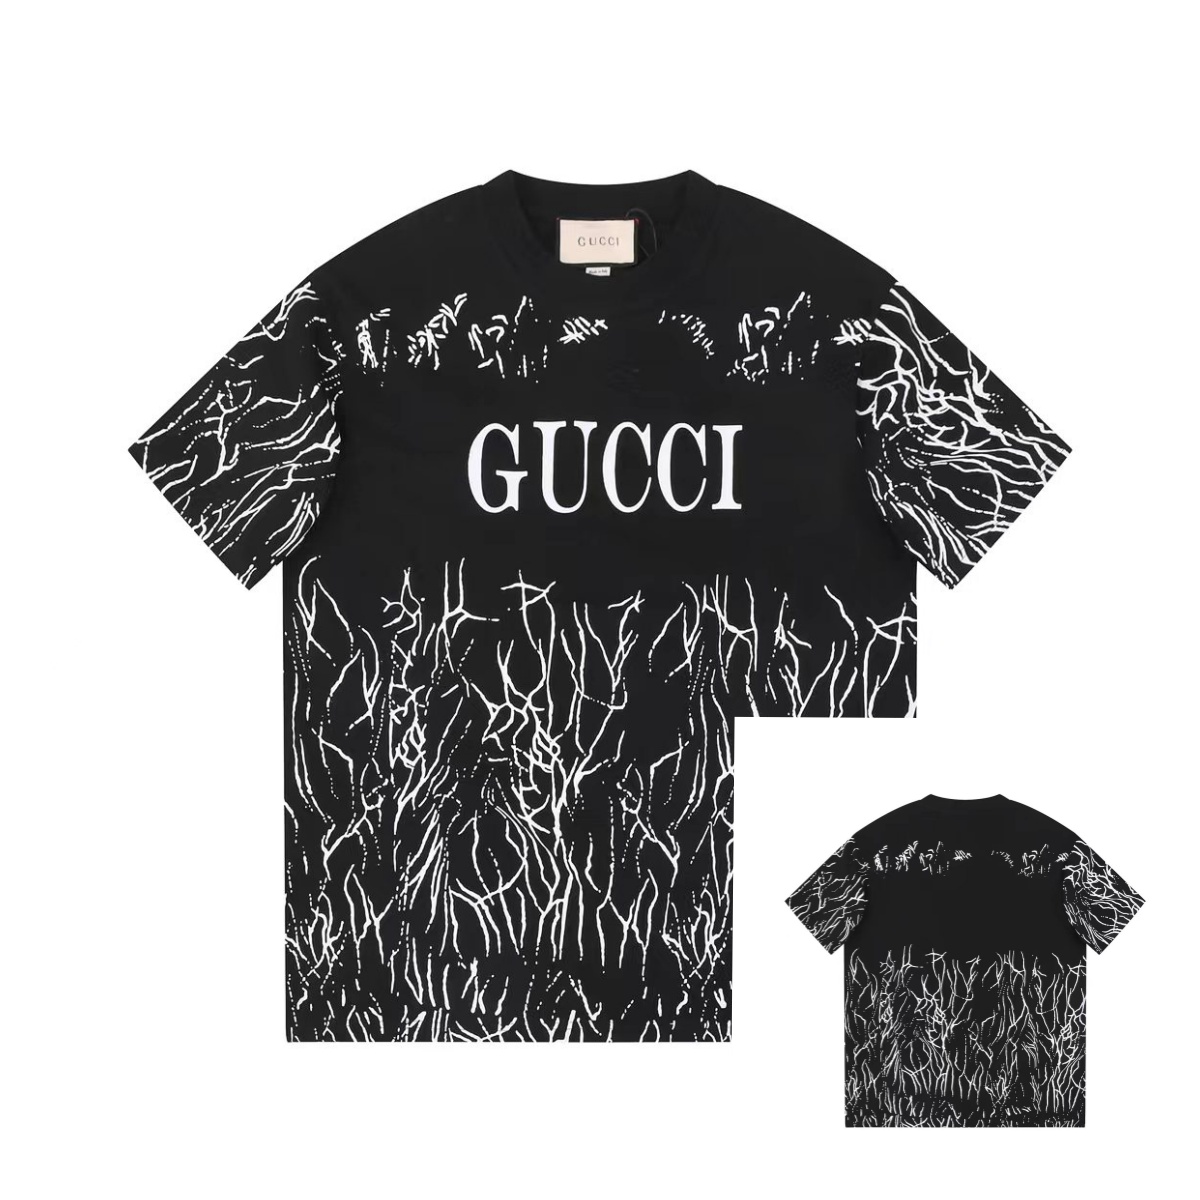 Gucci Clothing T-Shirt Black Printing Unisex Cotton Spring/Summer Collection Fashion Short Sleeve